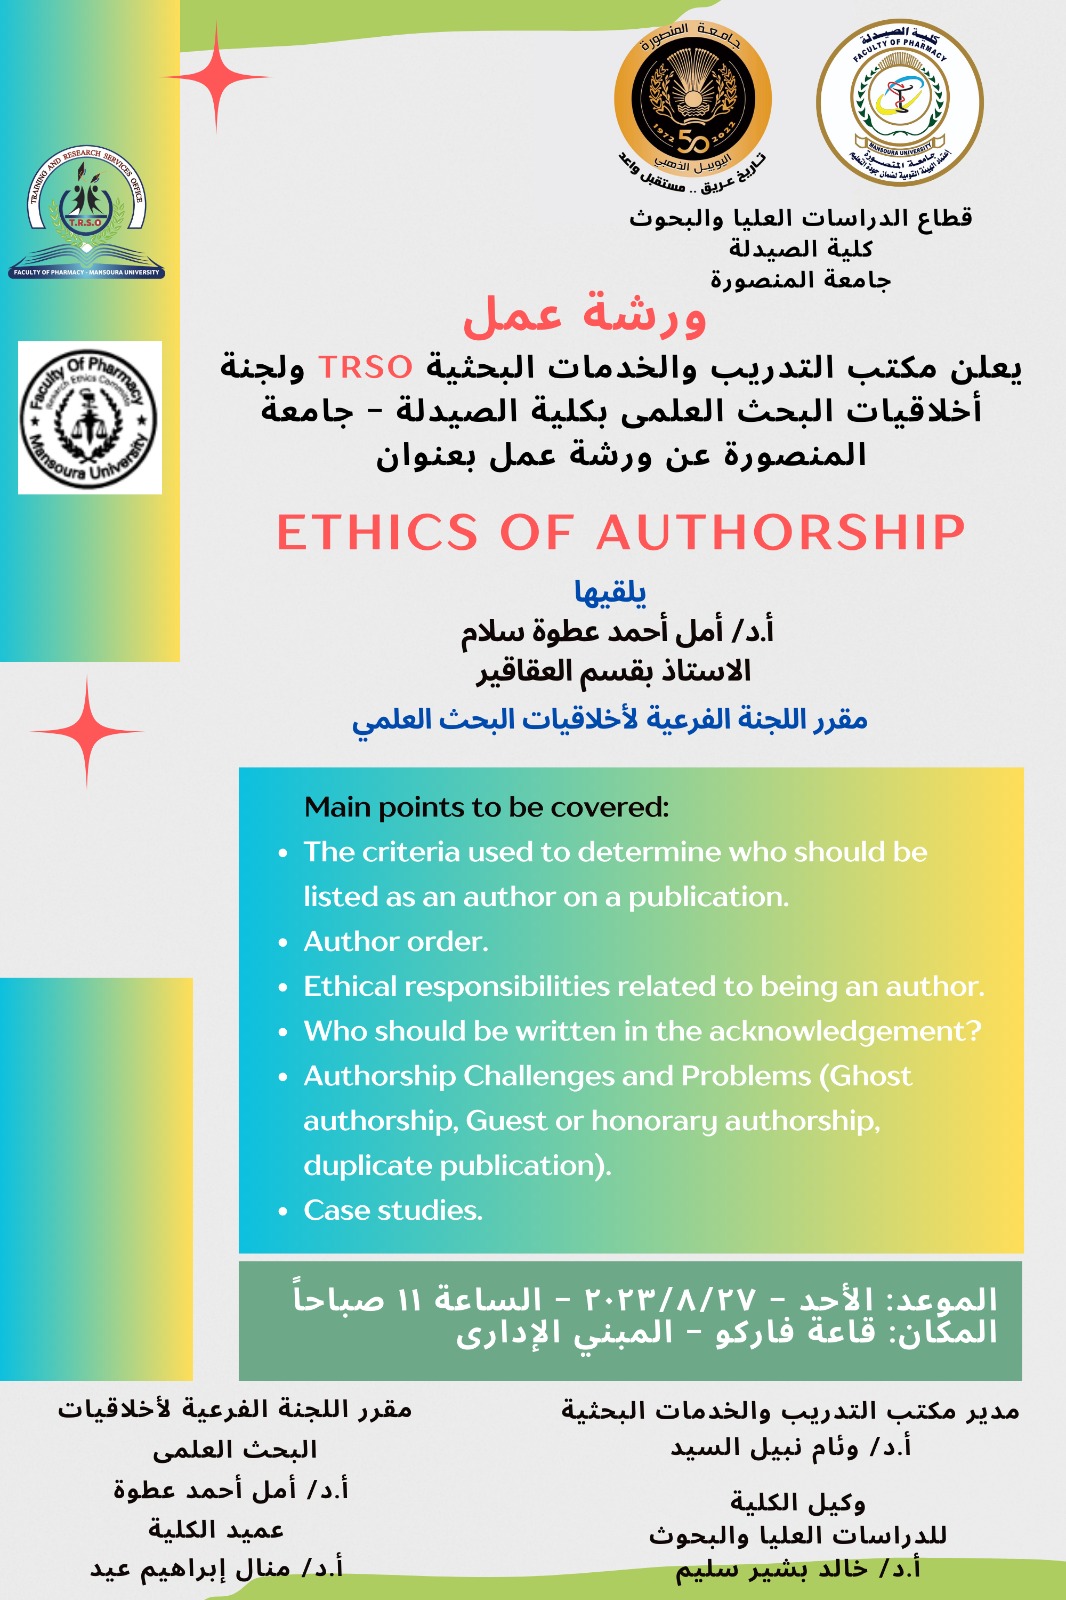 The Training and Research Services Office TRSO announces the holding of a workshop entitled ETHICS OF AUTHORSHIP